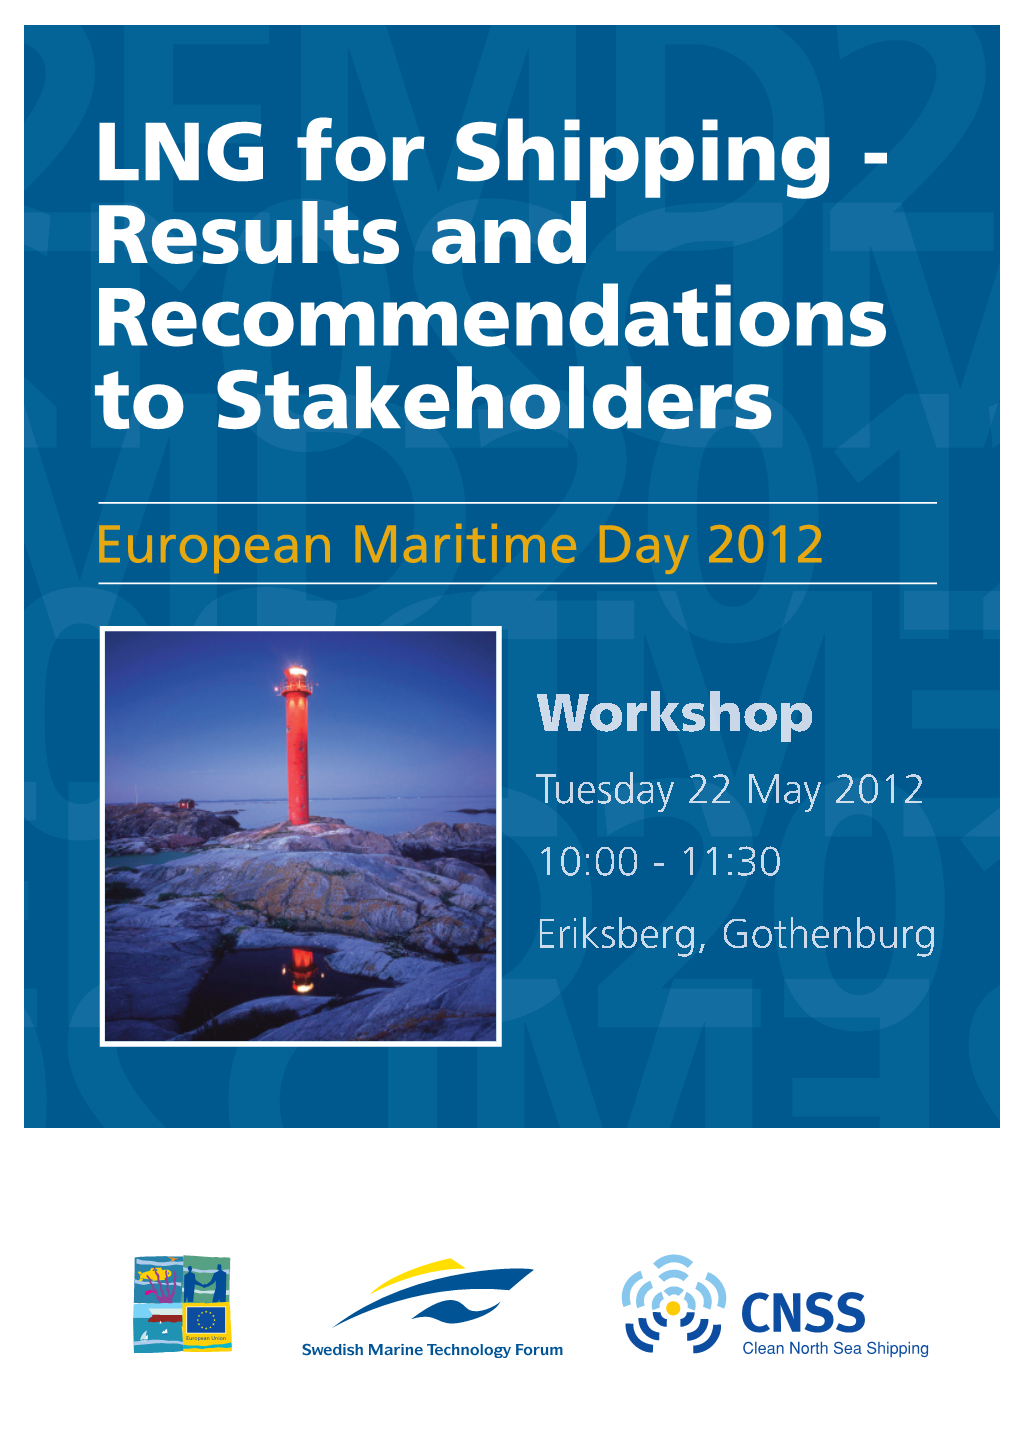 LNG for Shipping - Results and Recommendations to Stakeholders